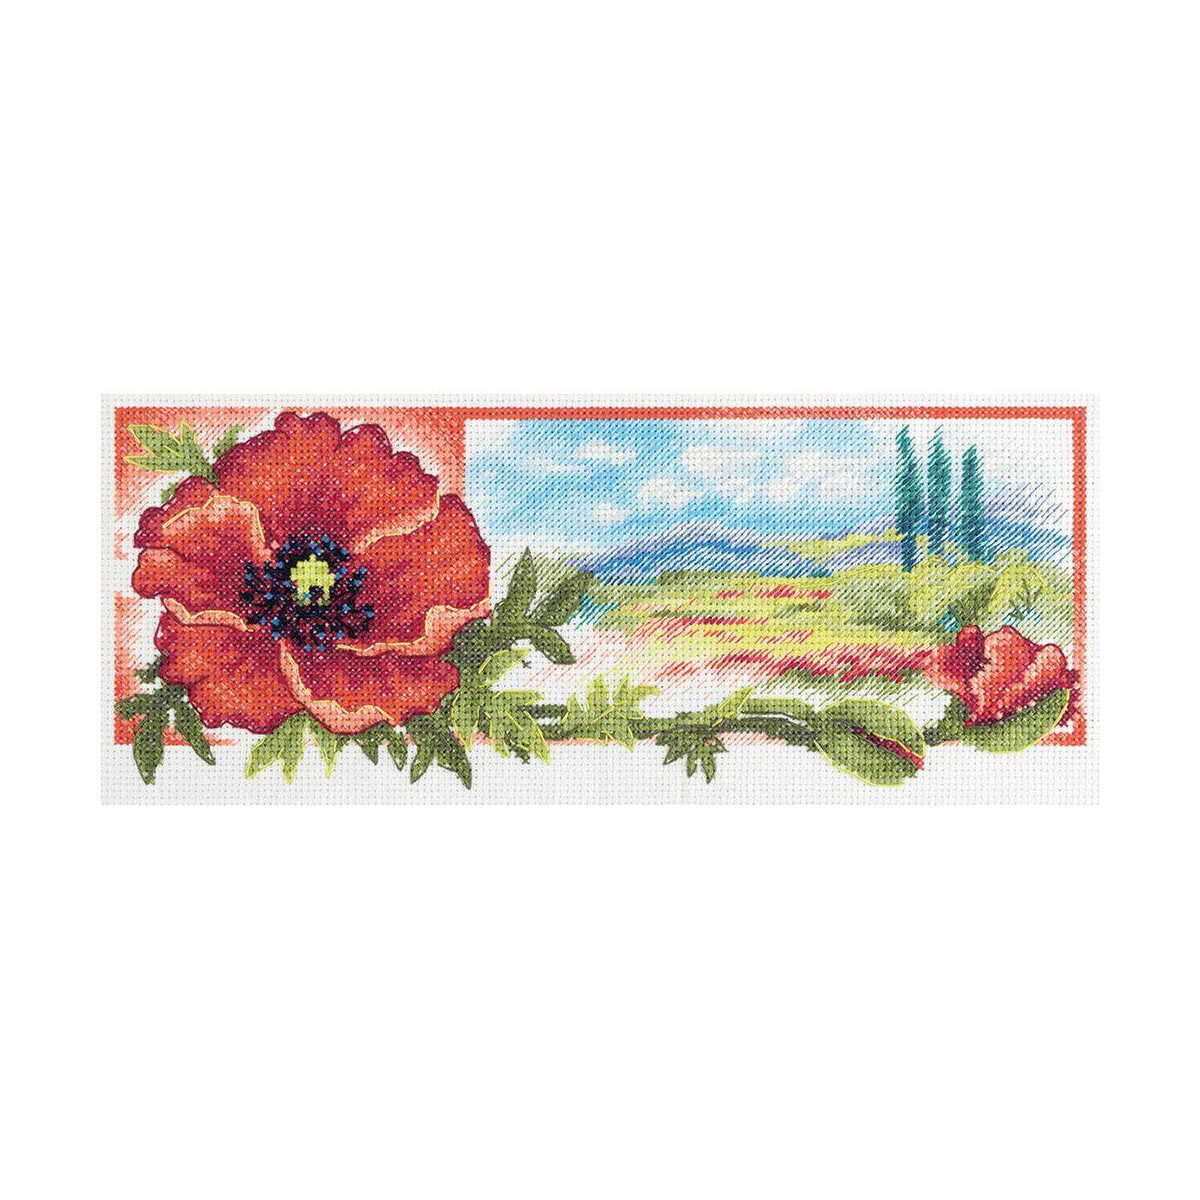 Panna counted cross stitch kit "The Red Hue of...